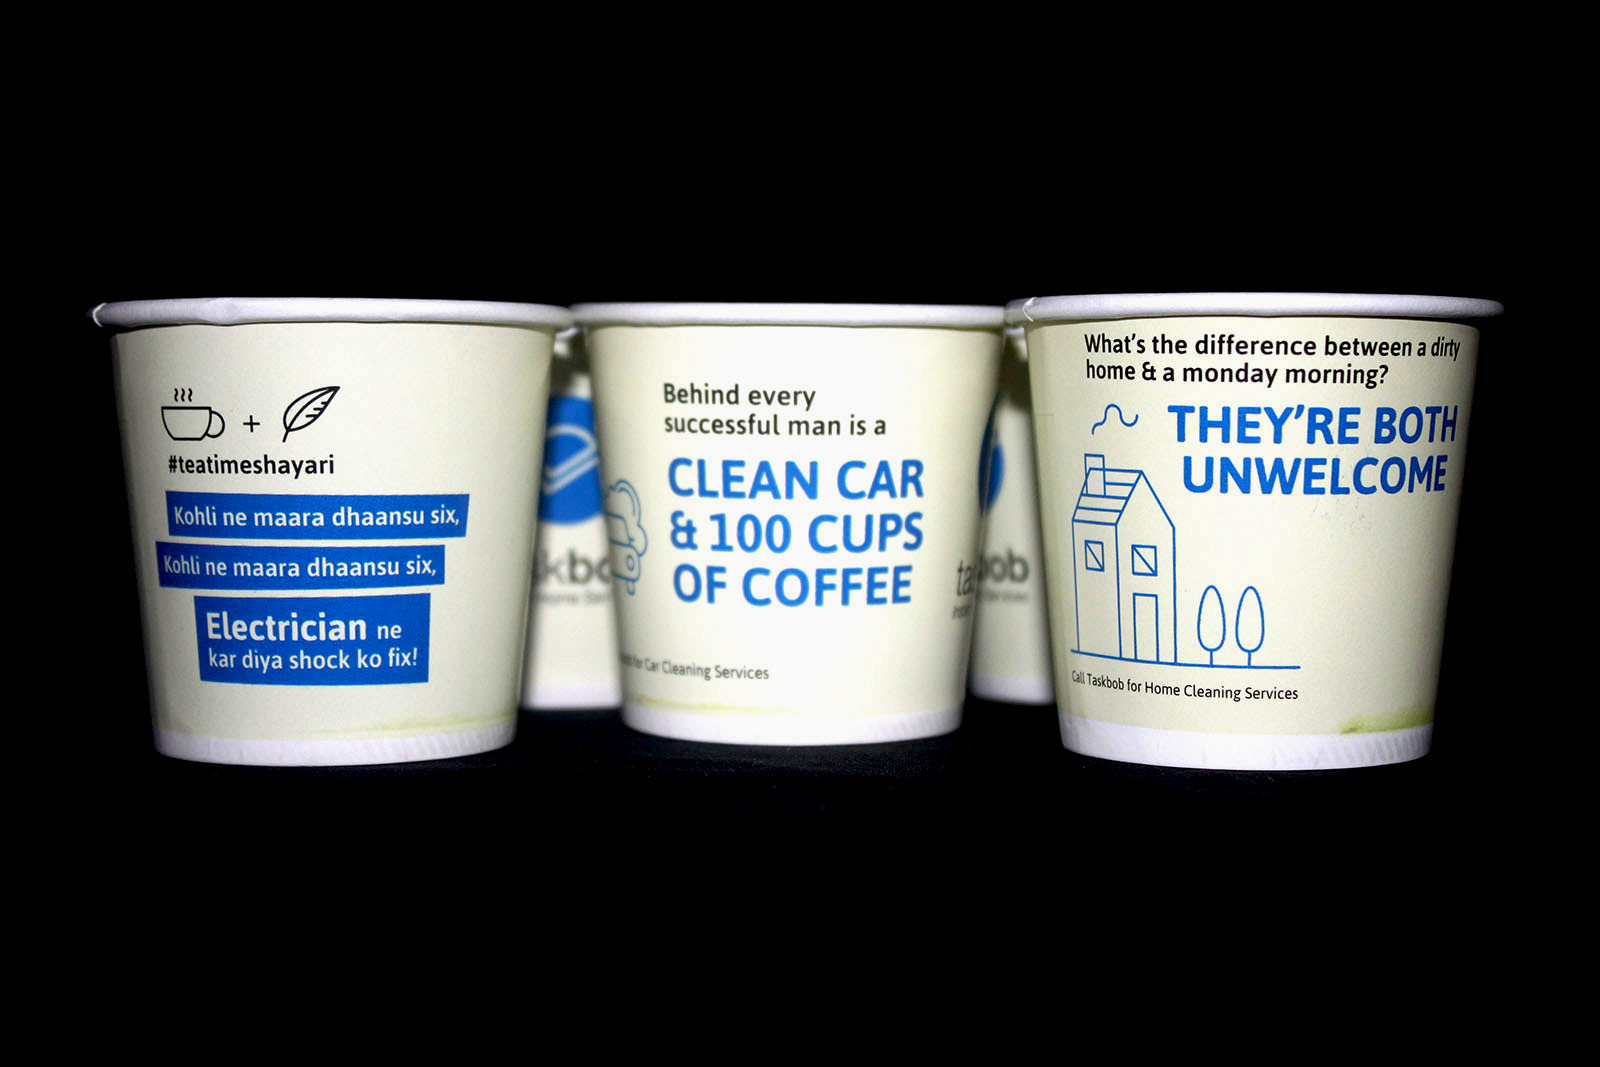 Paper cups for promotion of TaskBob, a home services app